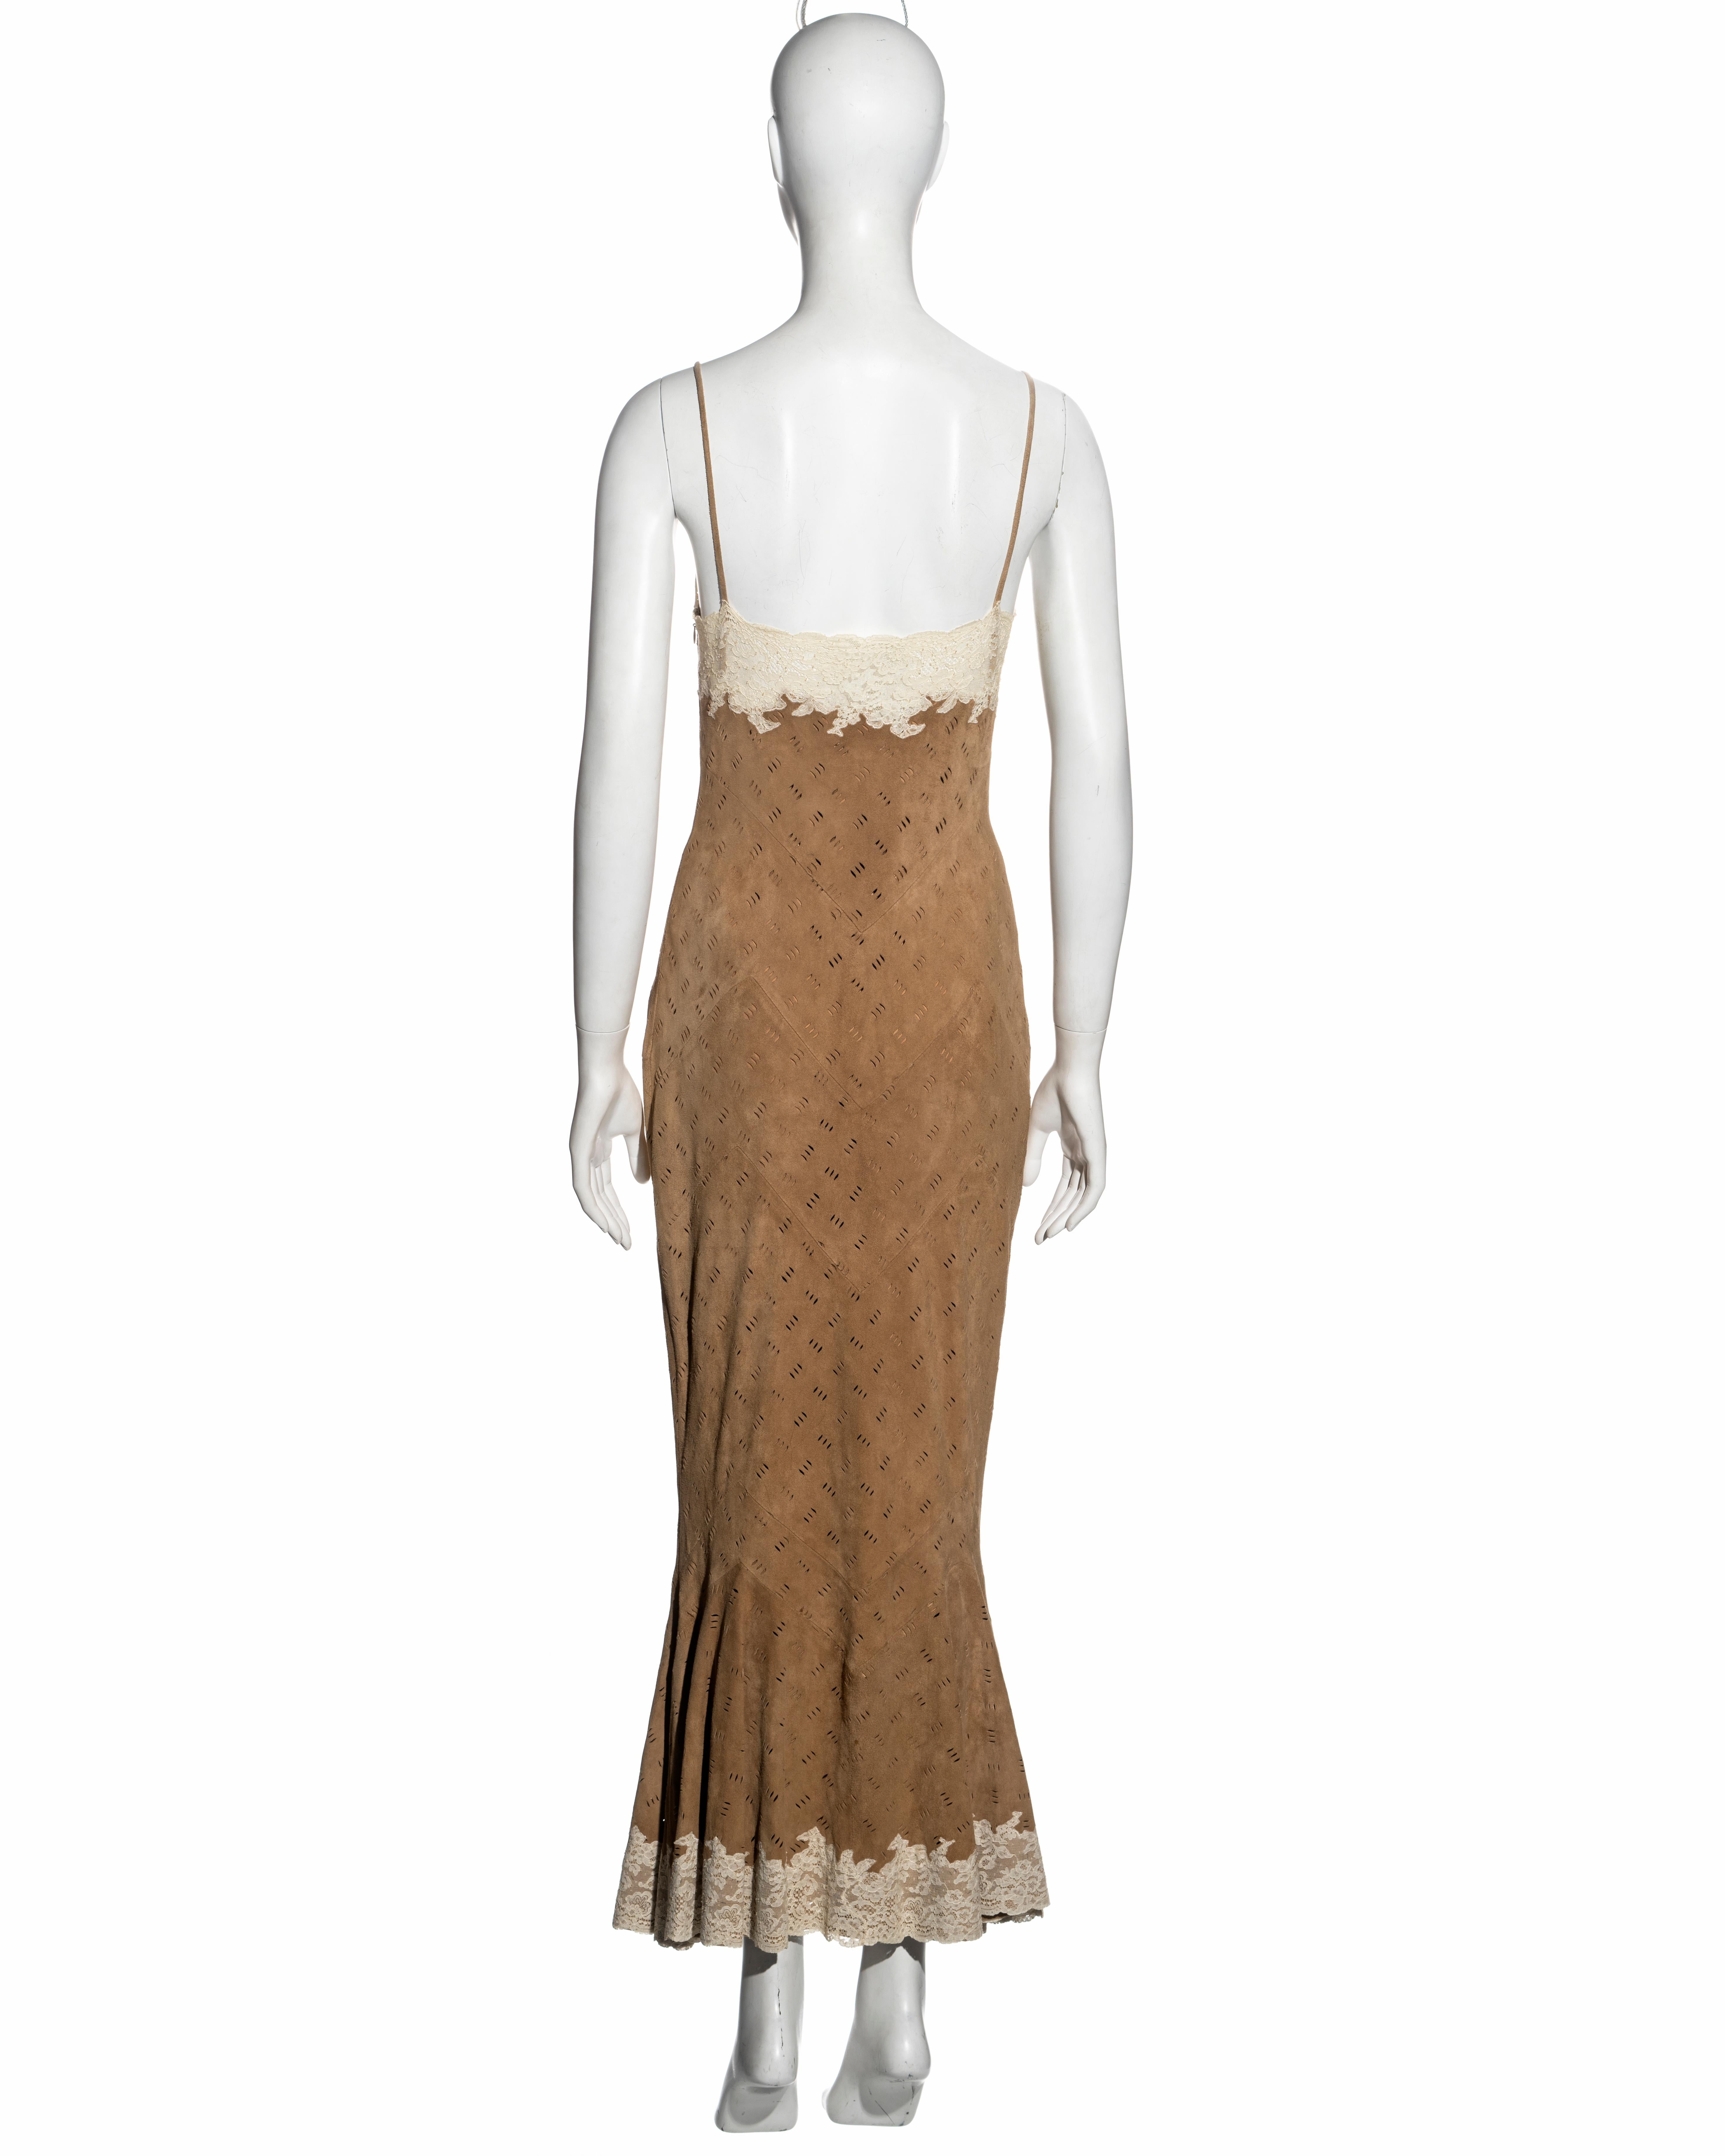 Christian Dior by John Galliano Brown and Cream Suede and Lace Dress, FW 1999 For Sale 5